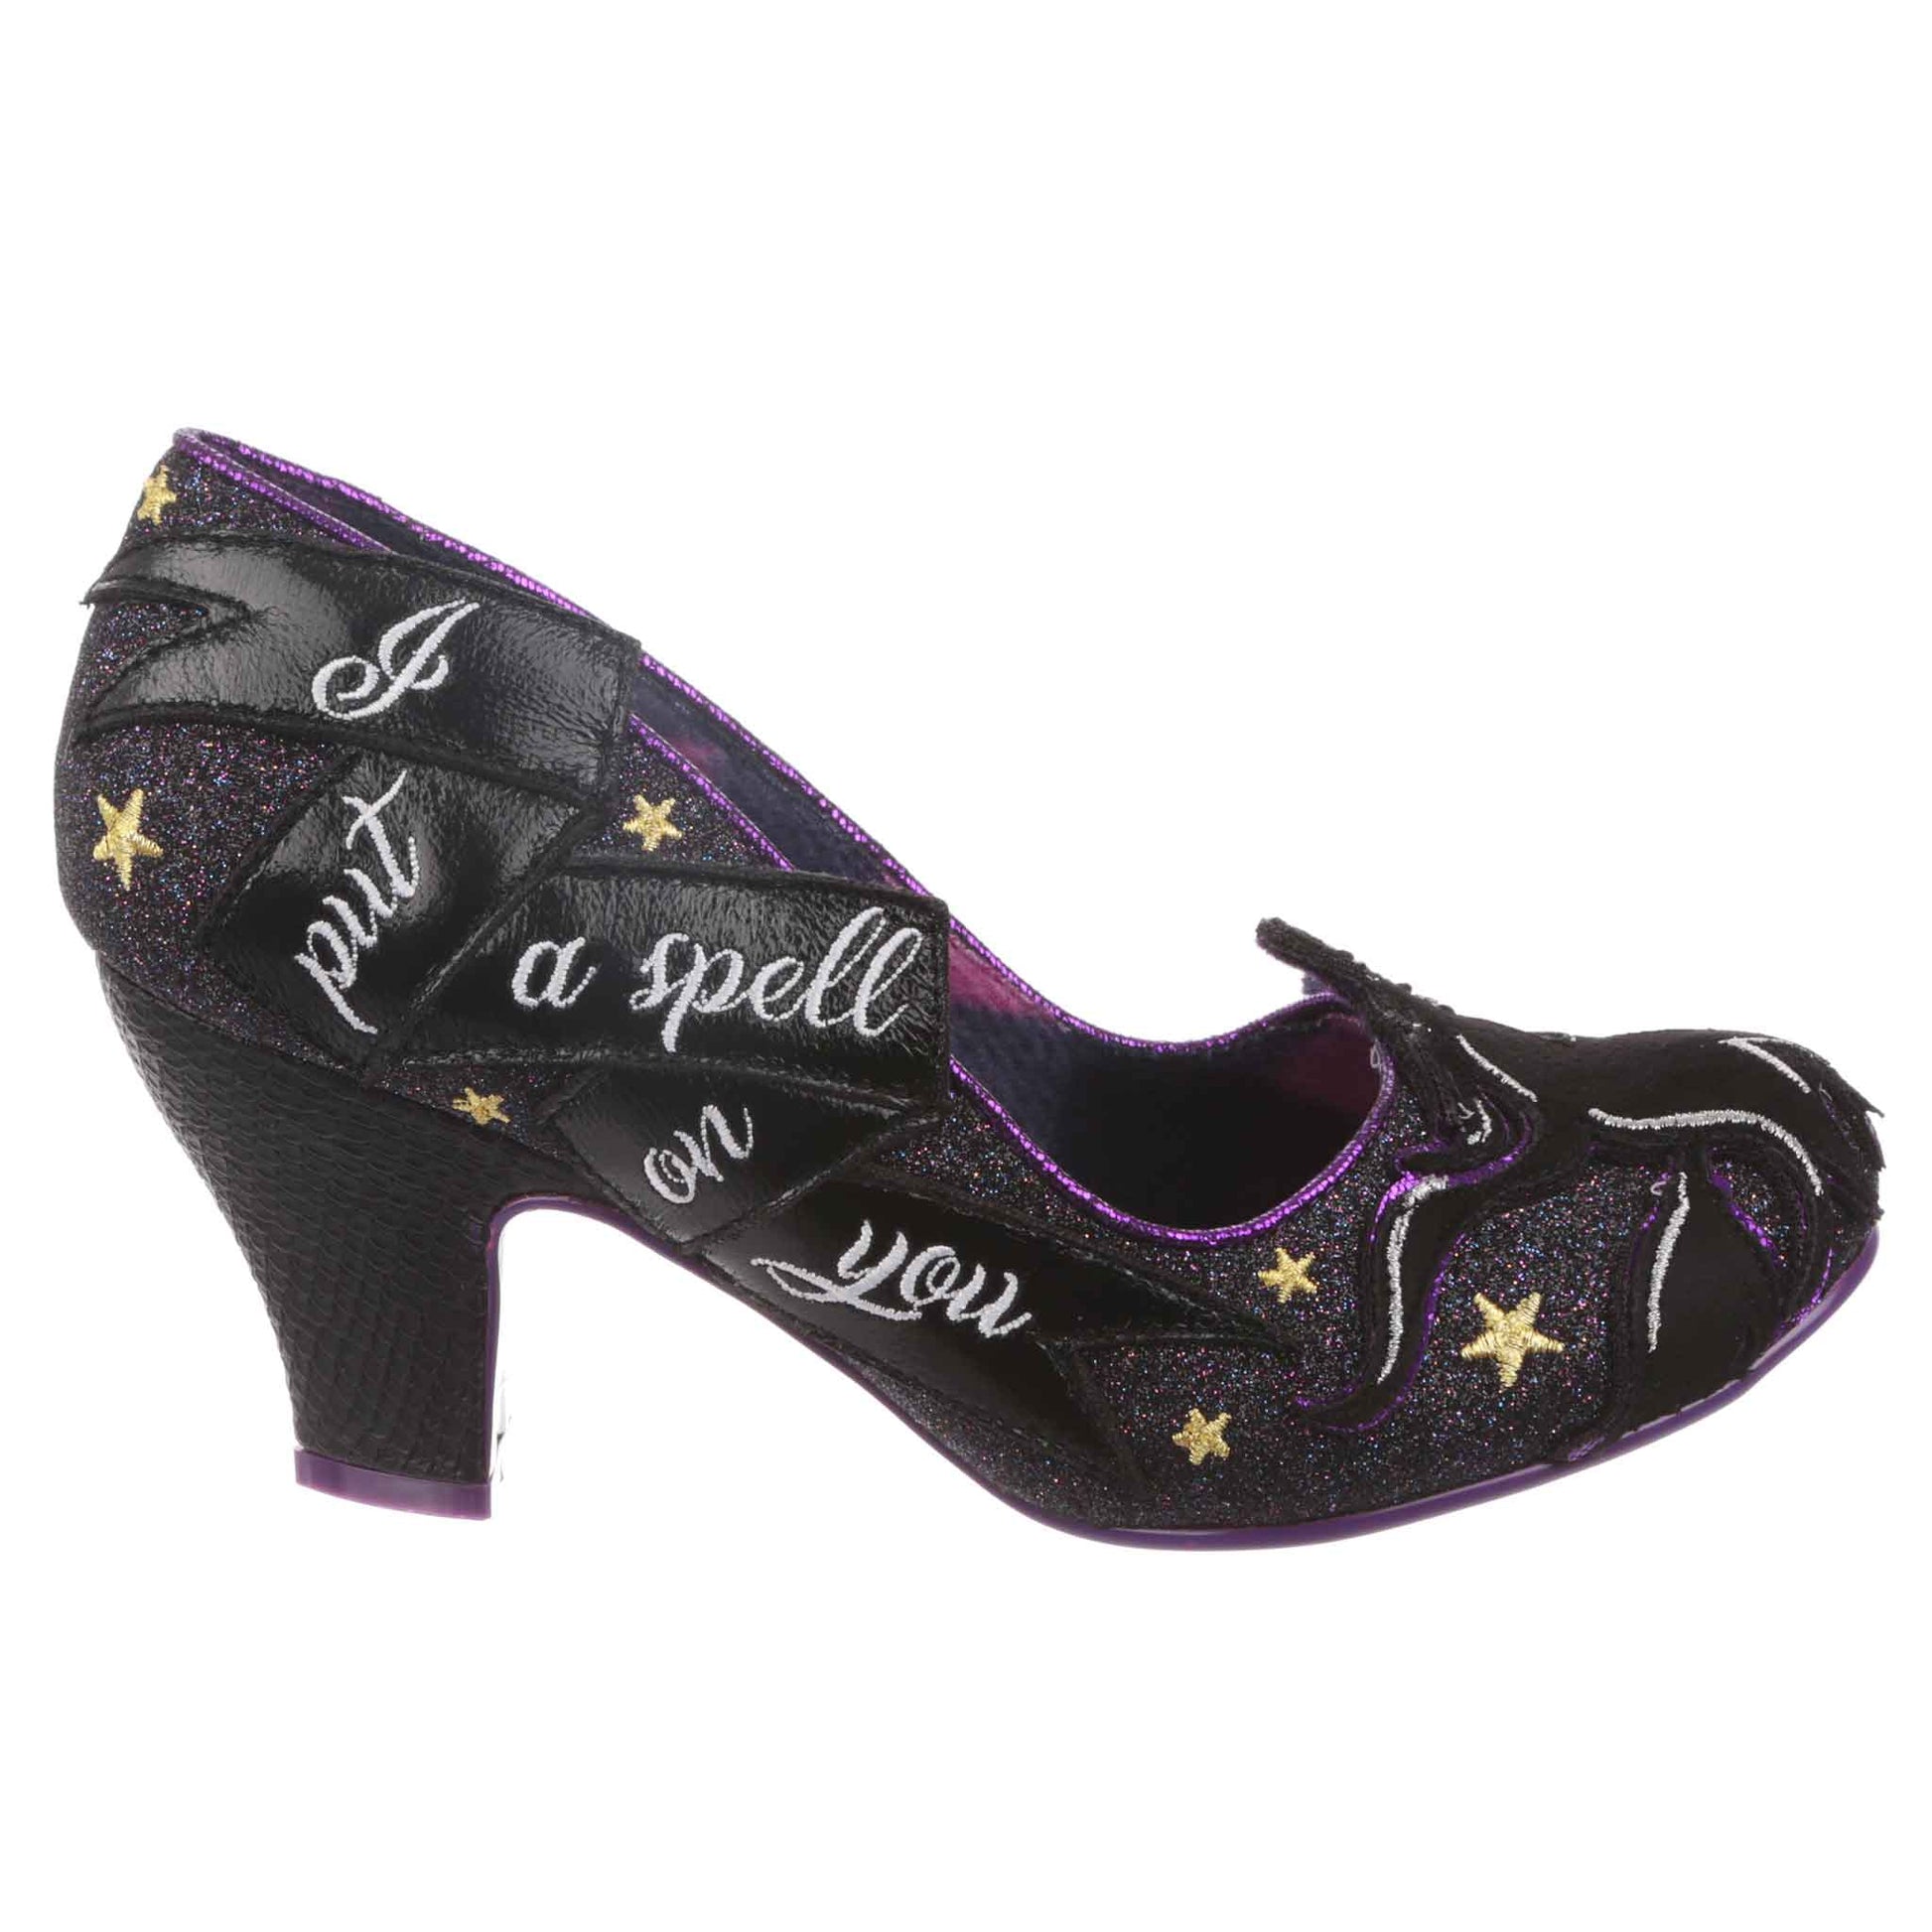 Now You're Mine - Rockamilly-Shoes-Vintage